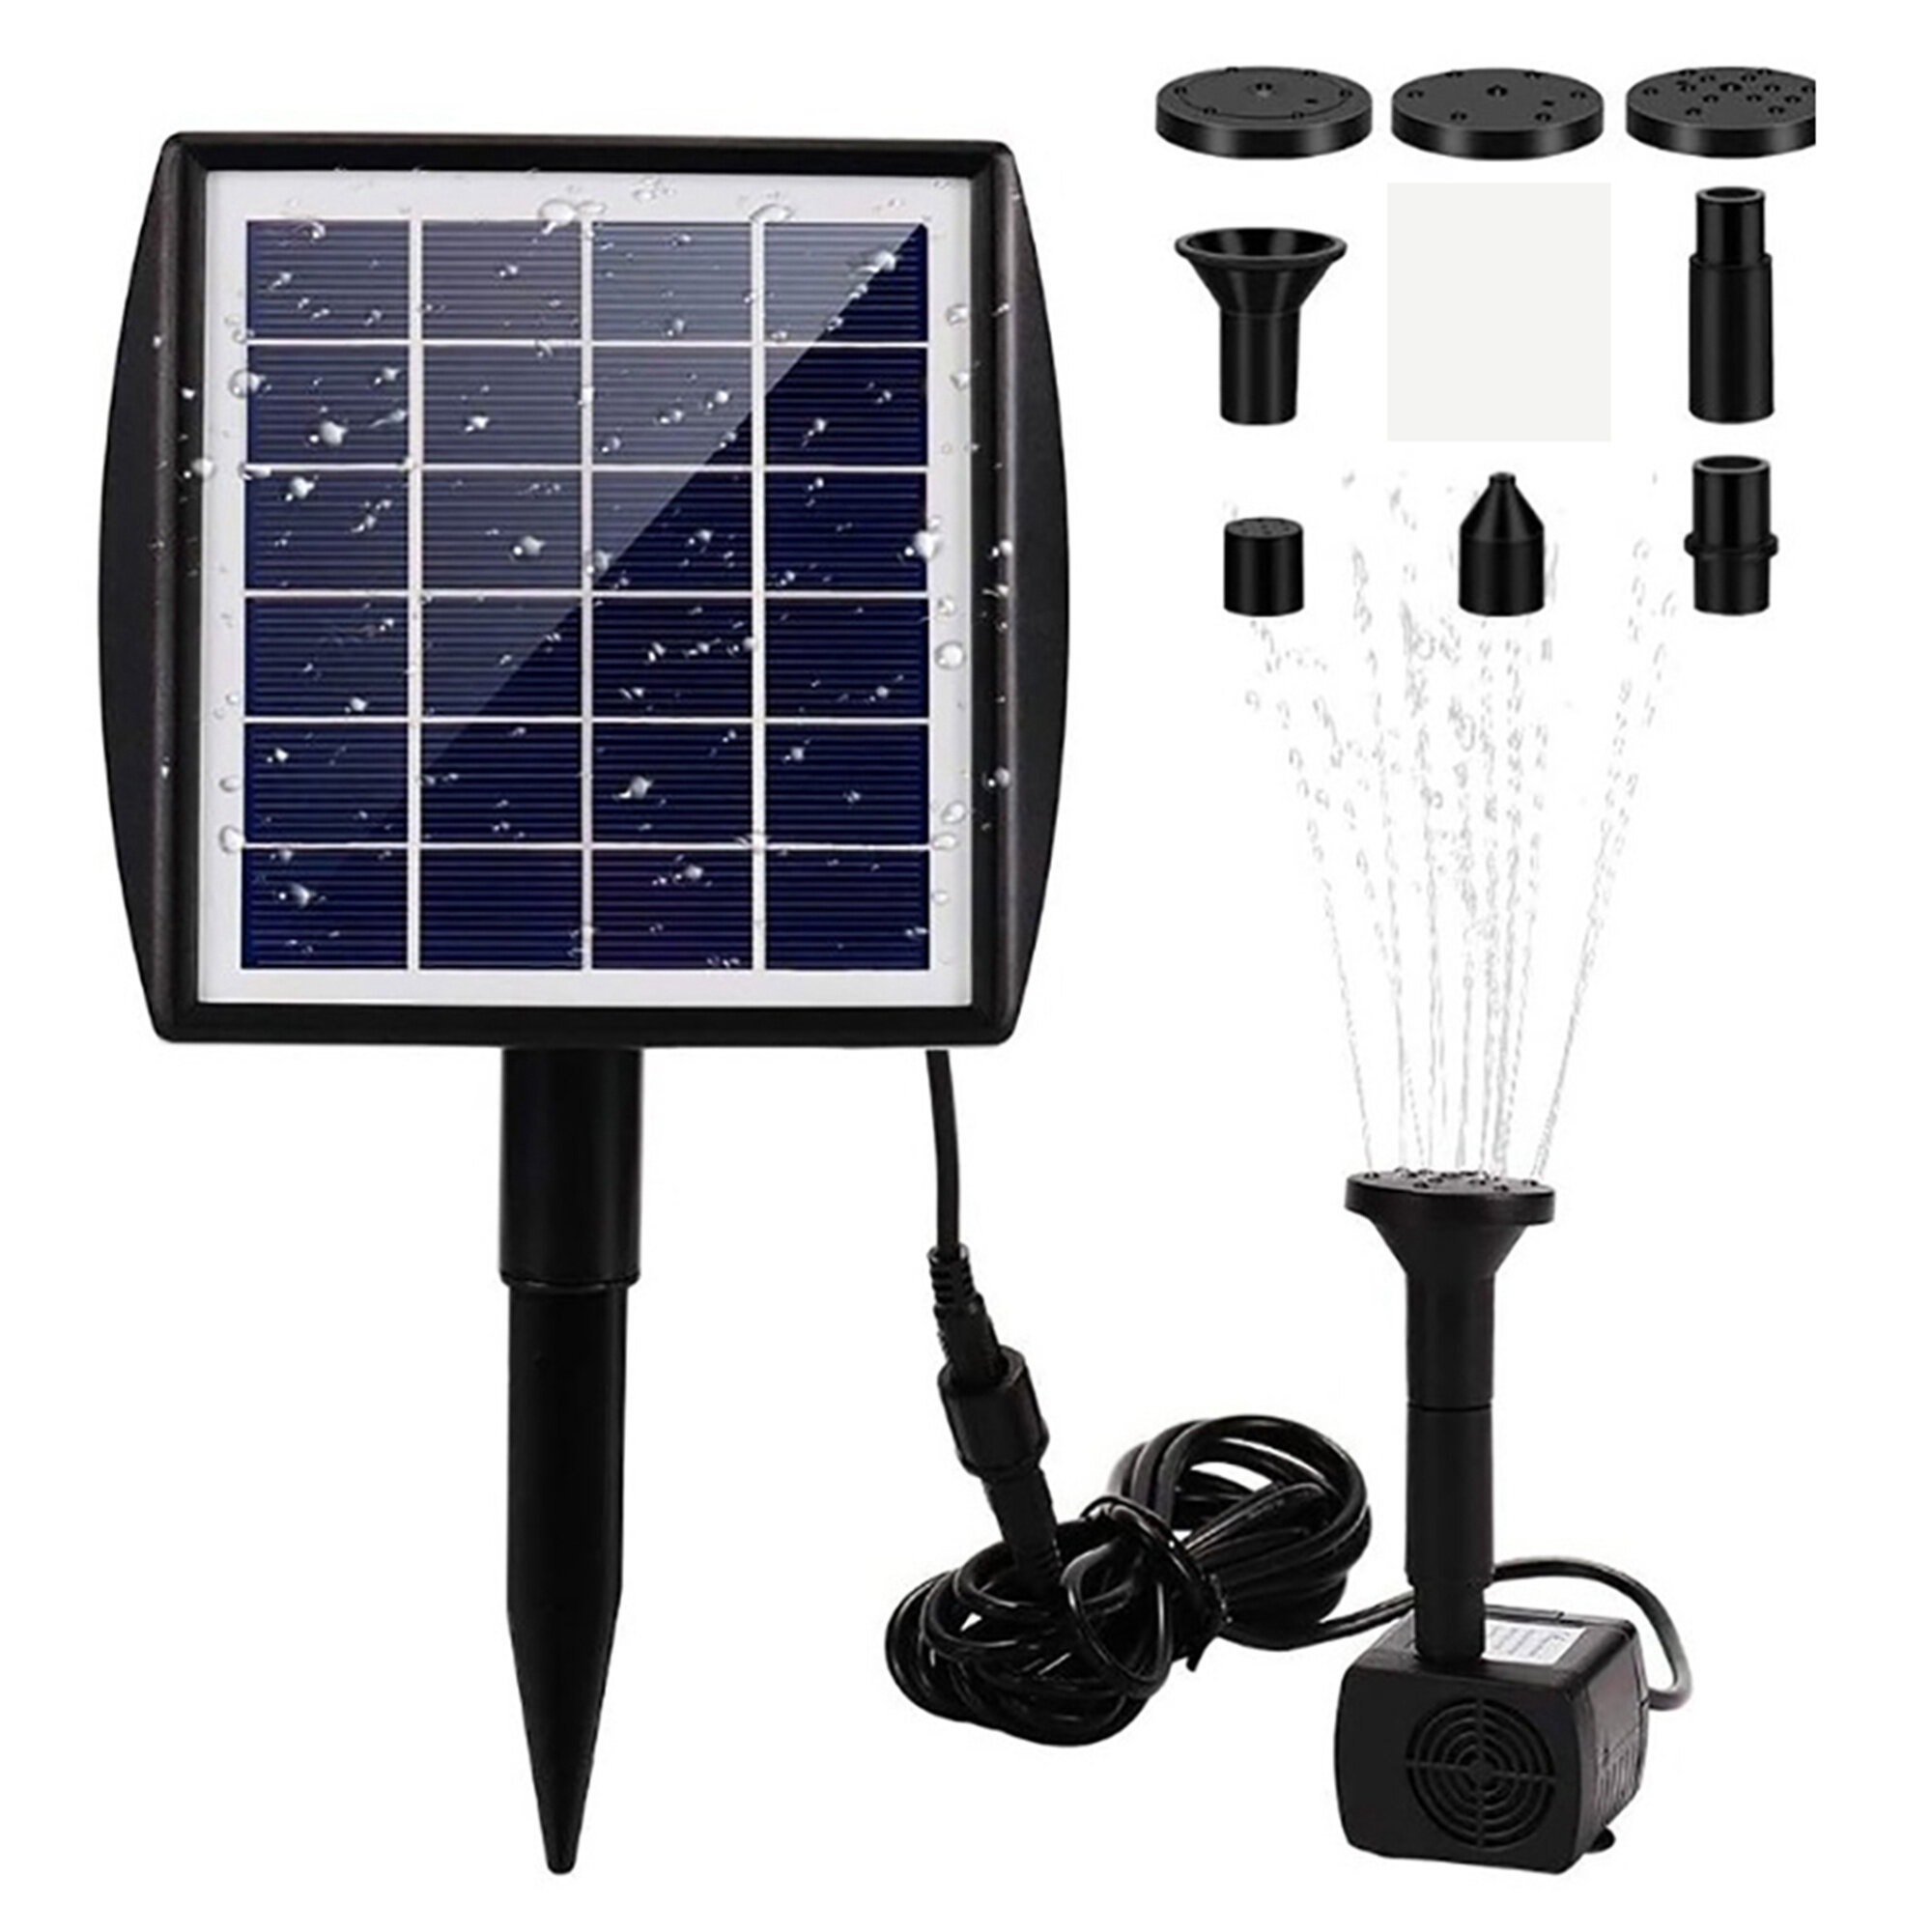 200L/H Solar Power Panel Kit Fountain Pool Pond Garden Submersible Water Pump US 